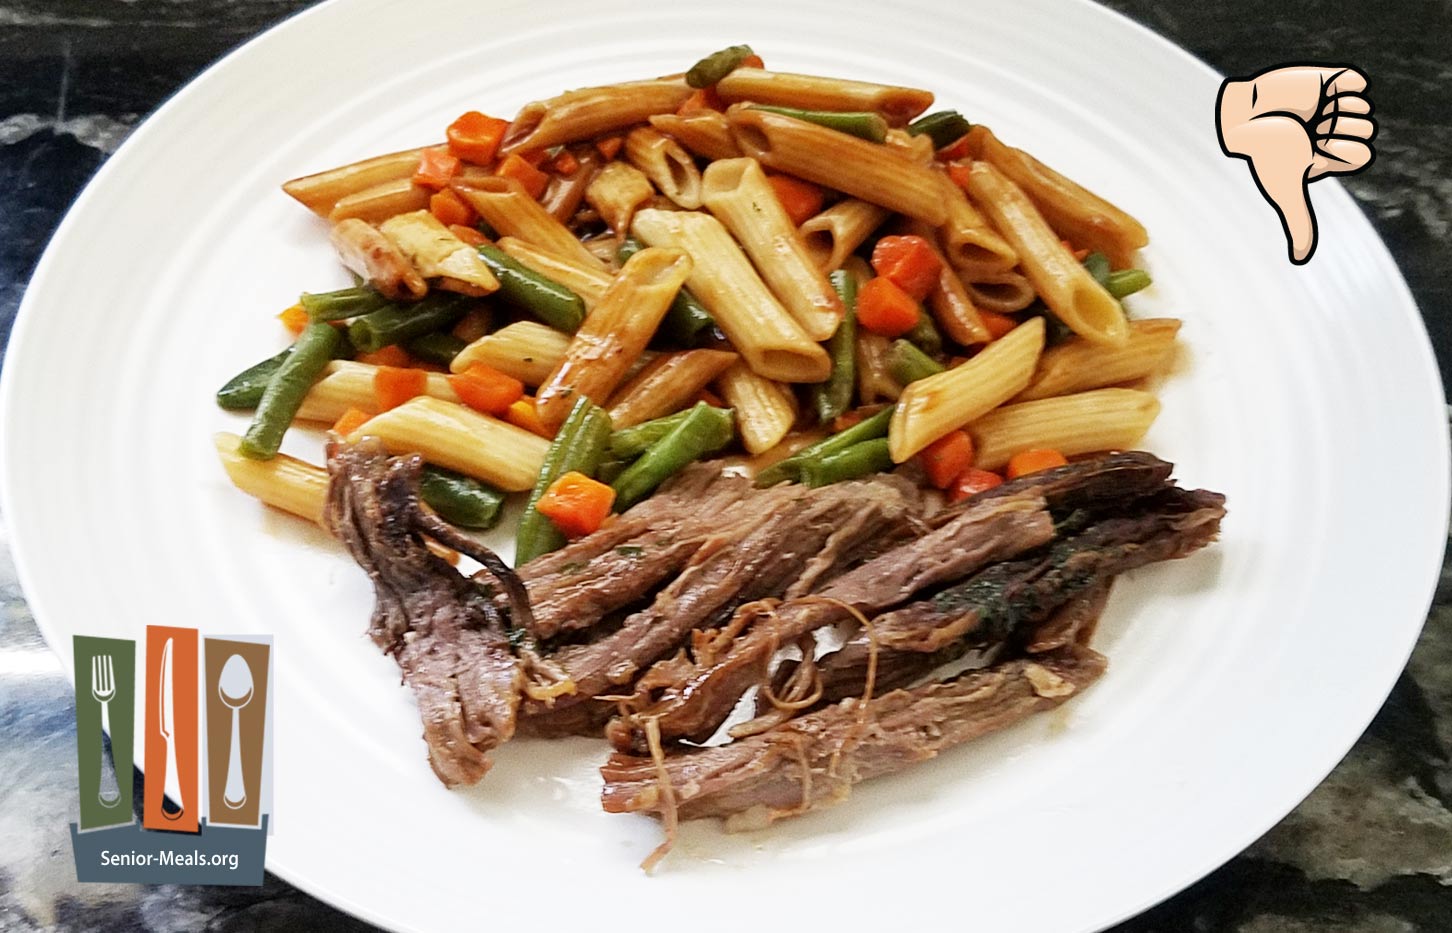 Beef Pot Roast with Red Wine Sauce over Noodles with Carrots & Green Beans  - $13